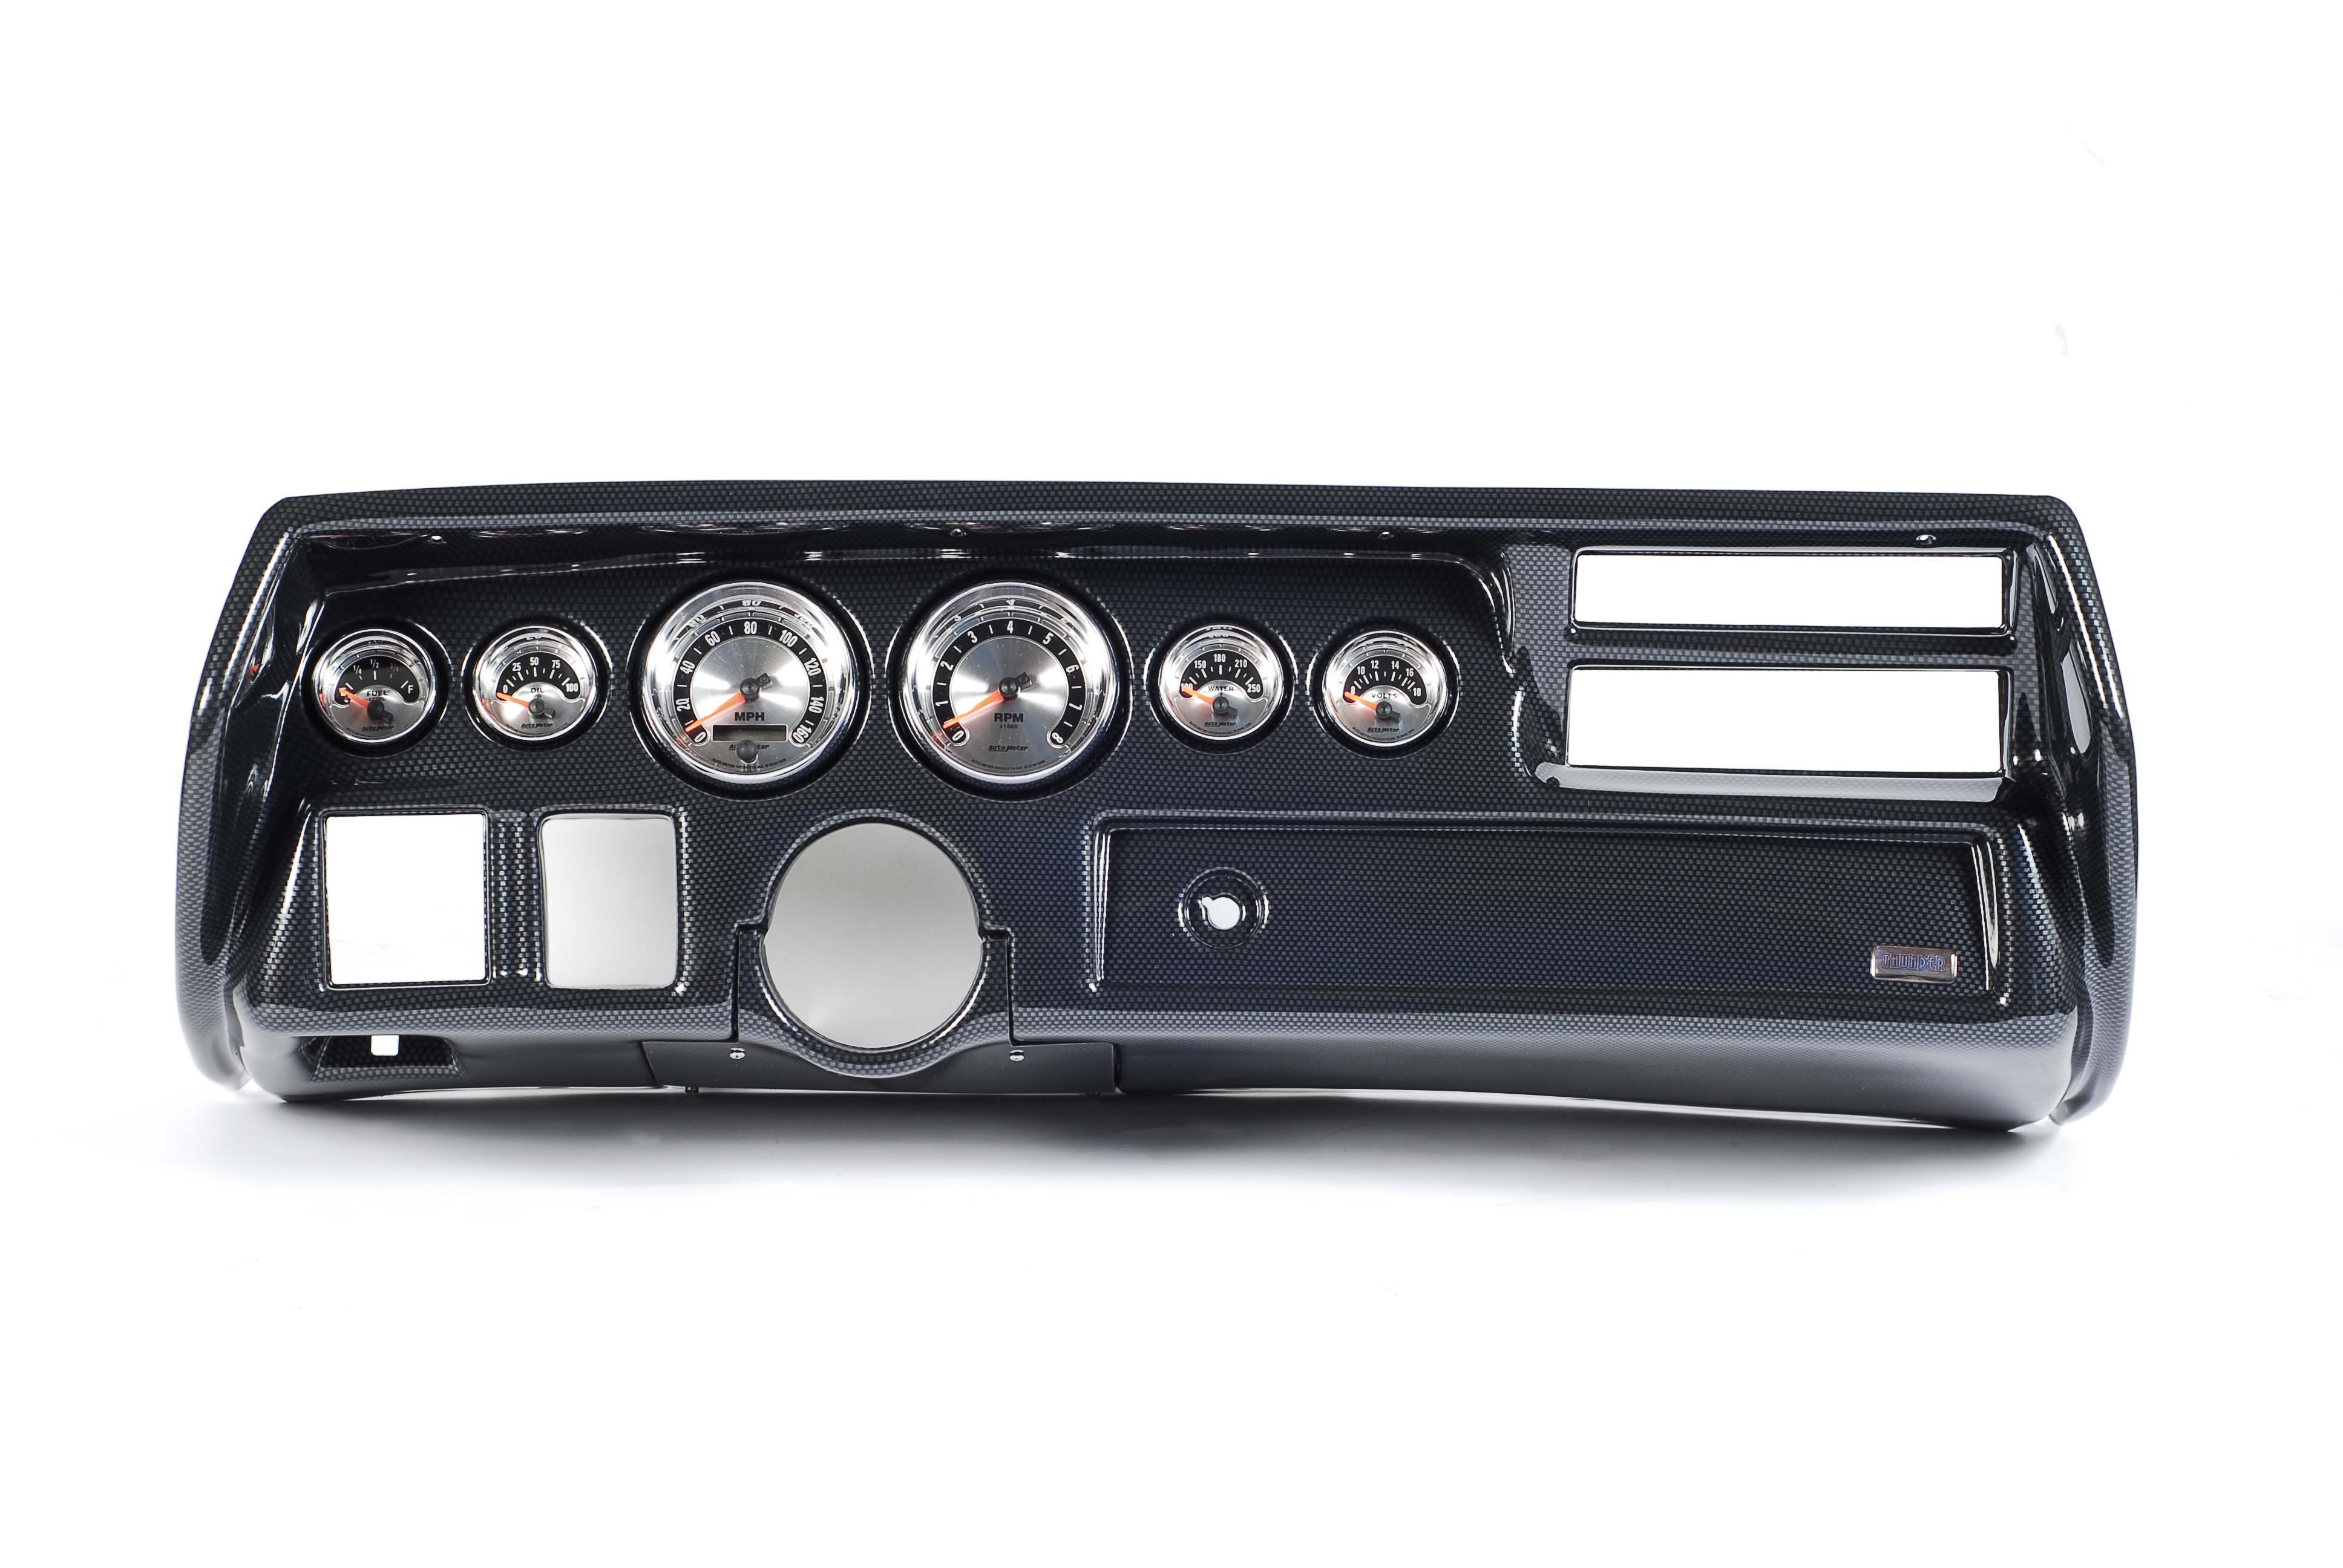 Classic Thunder Road Instrument Panel for 1970-72 Chevelle, El Camino, and Monte Carlo